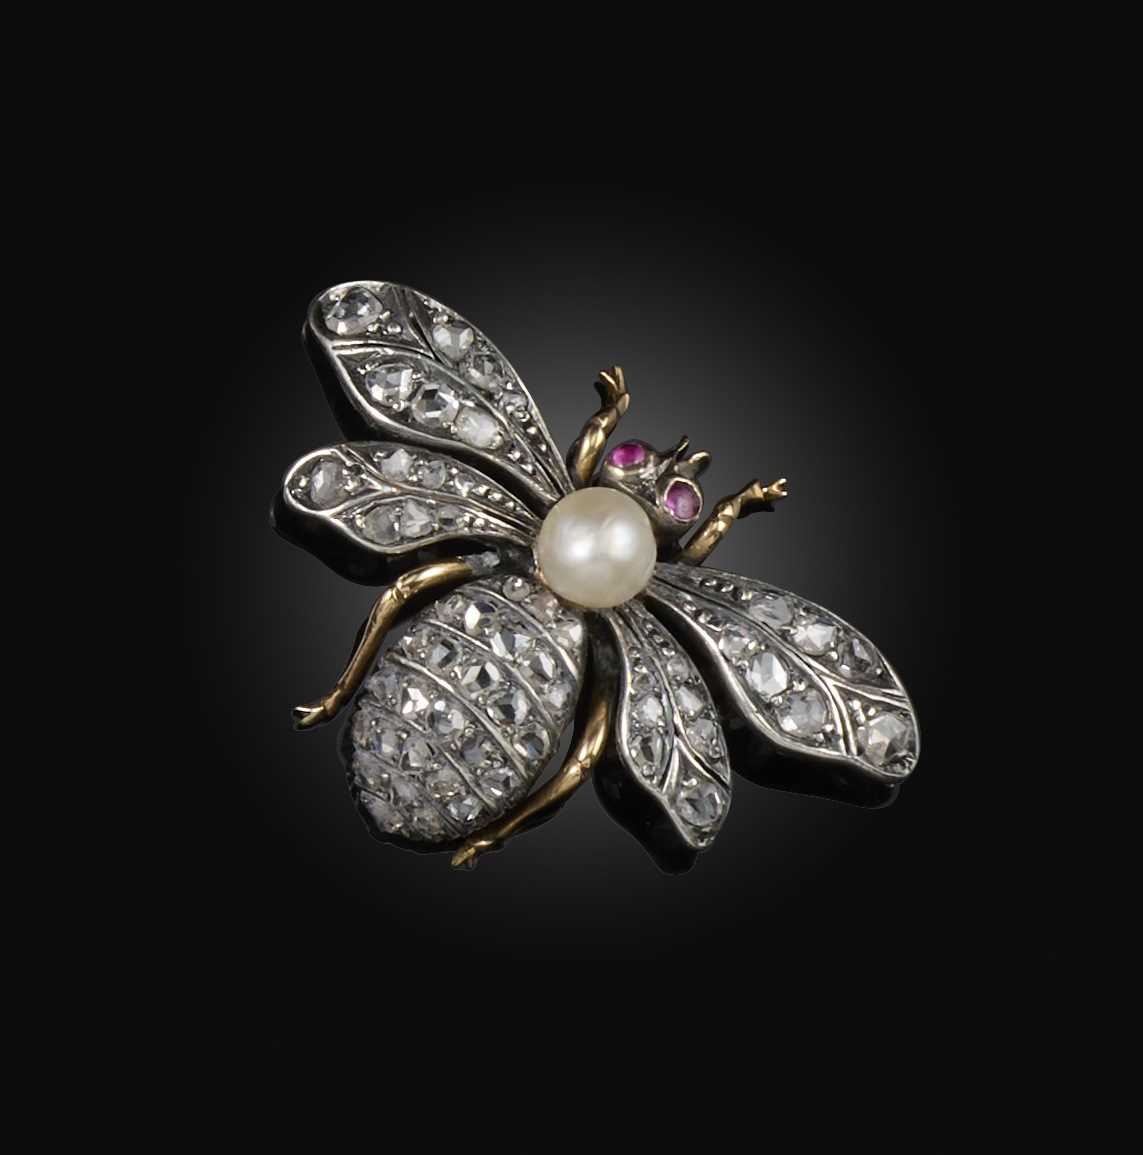 A pearl and diamond brooch, late 19th century, designed as a bee, set with rose-cut diamonds, its